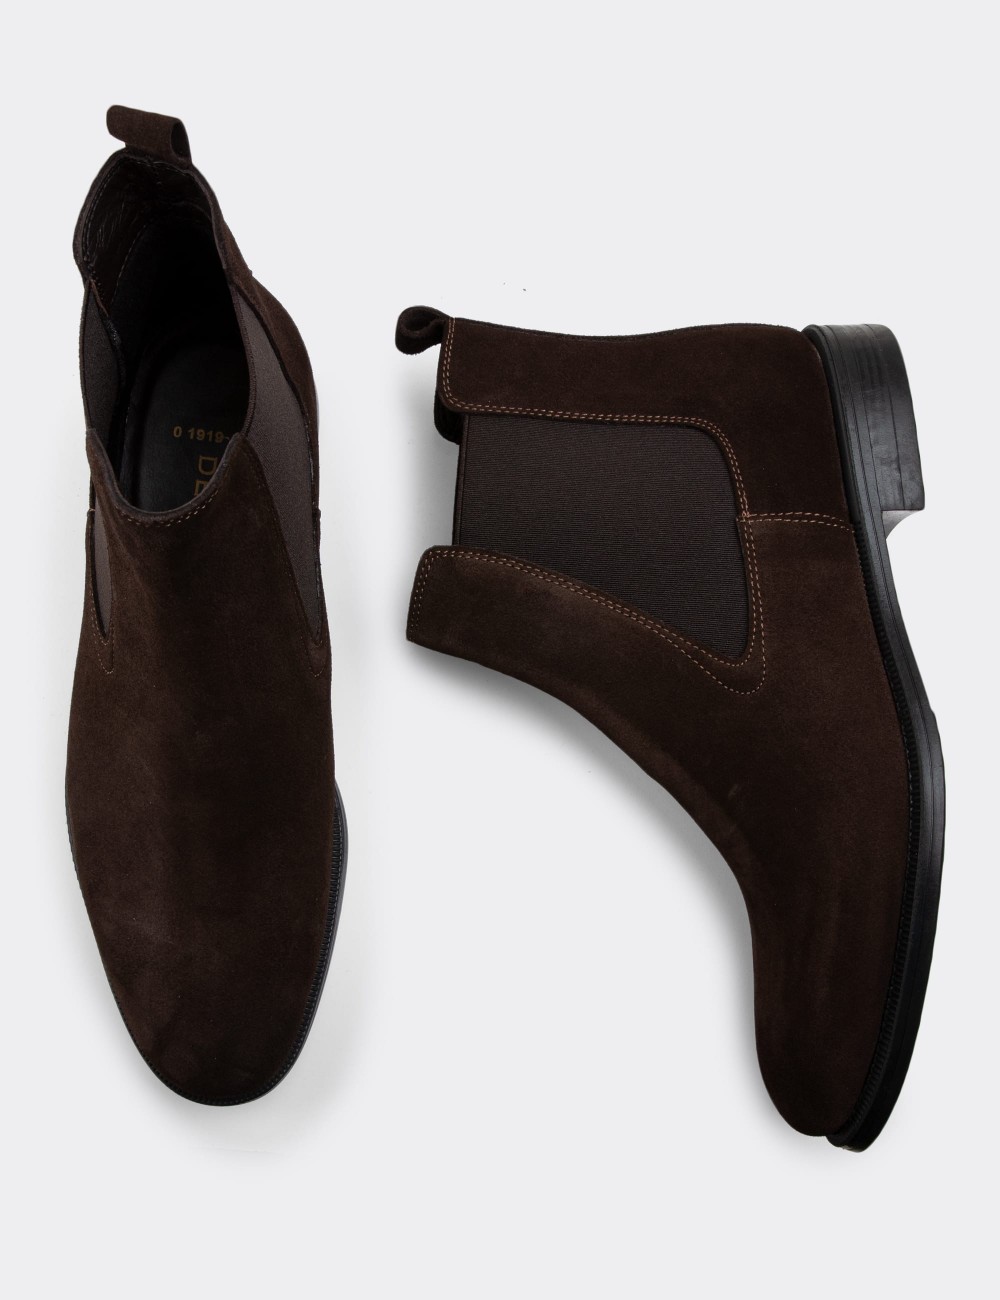 Brown Suede Leather Chelsea Boots - 01919MKHVC02